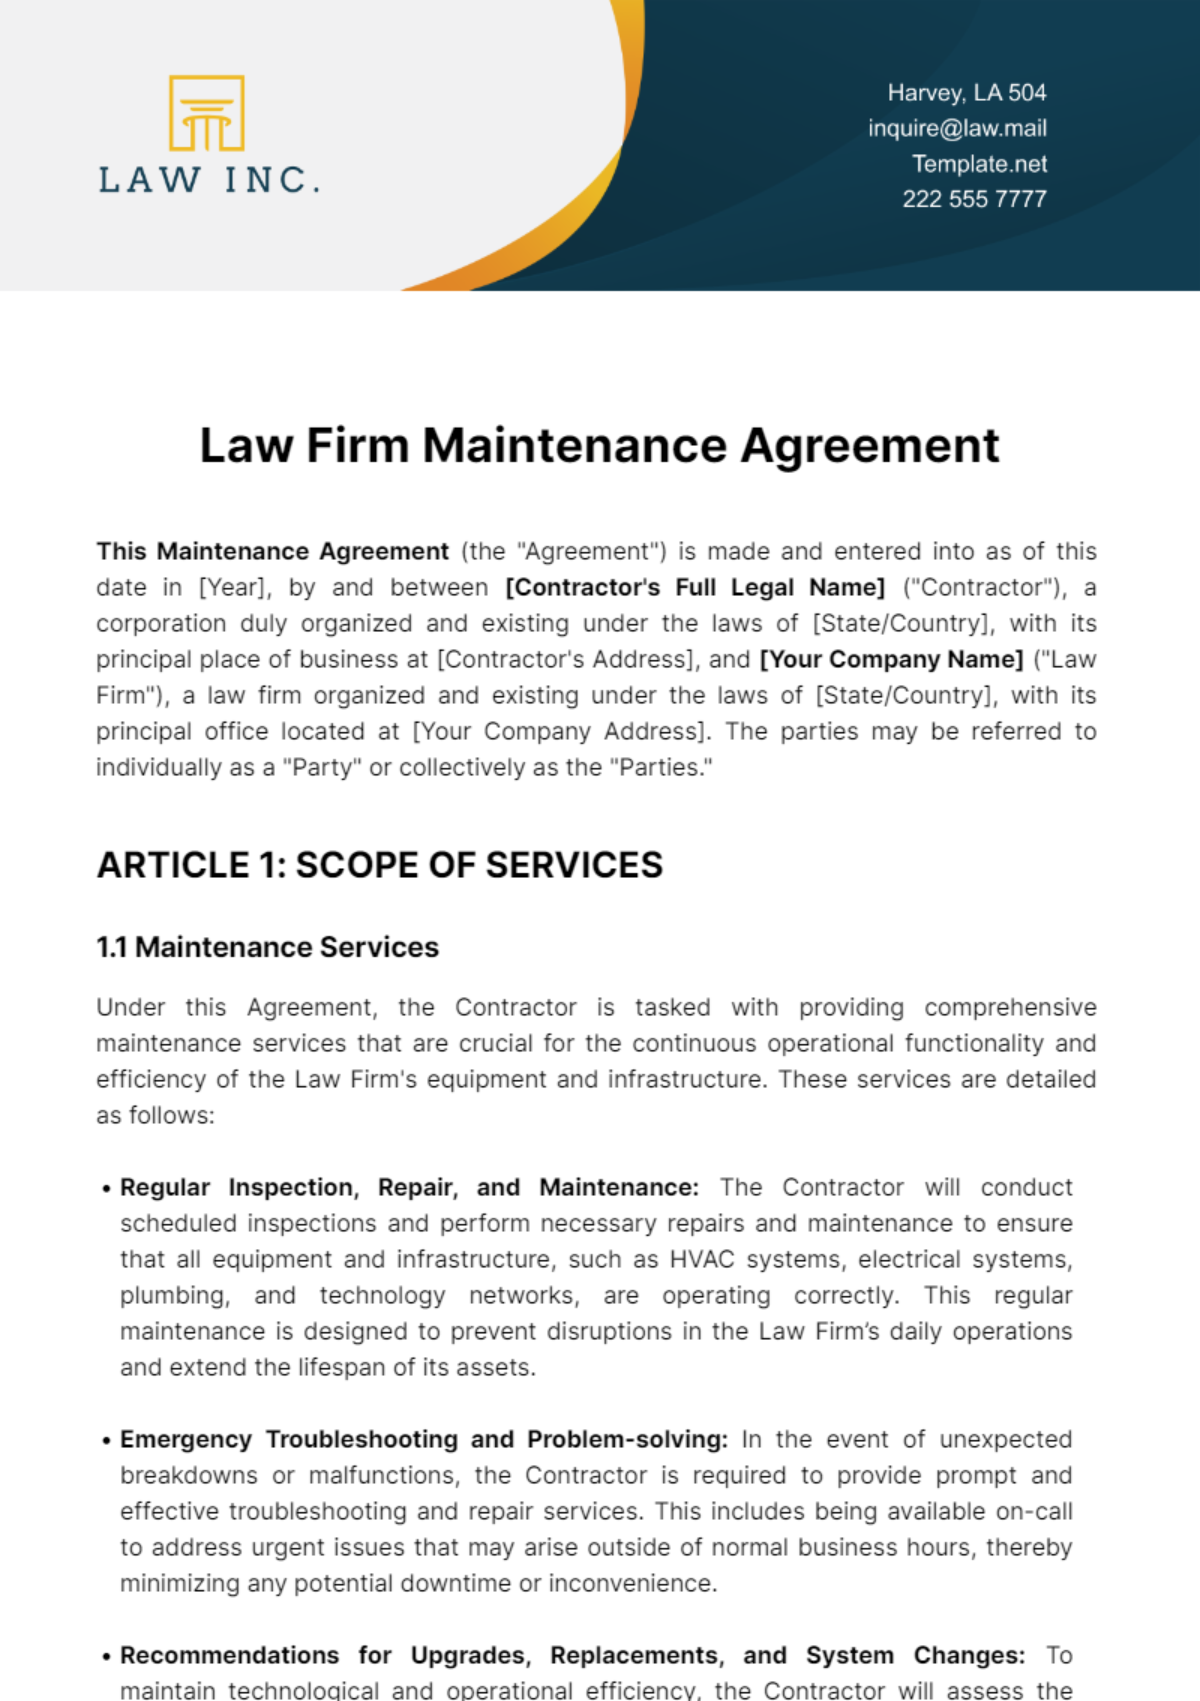 Free Law Firm Maintenance Agreement Template